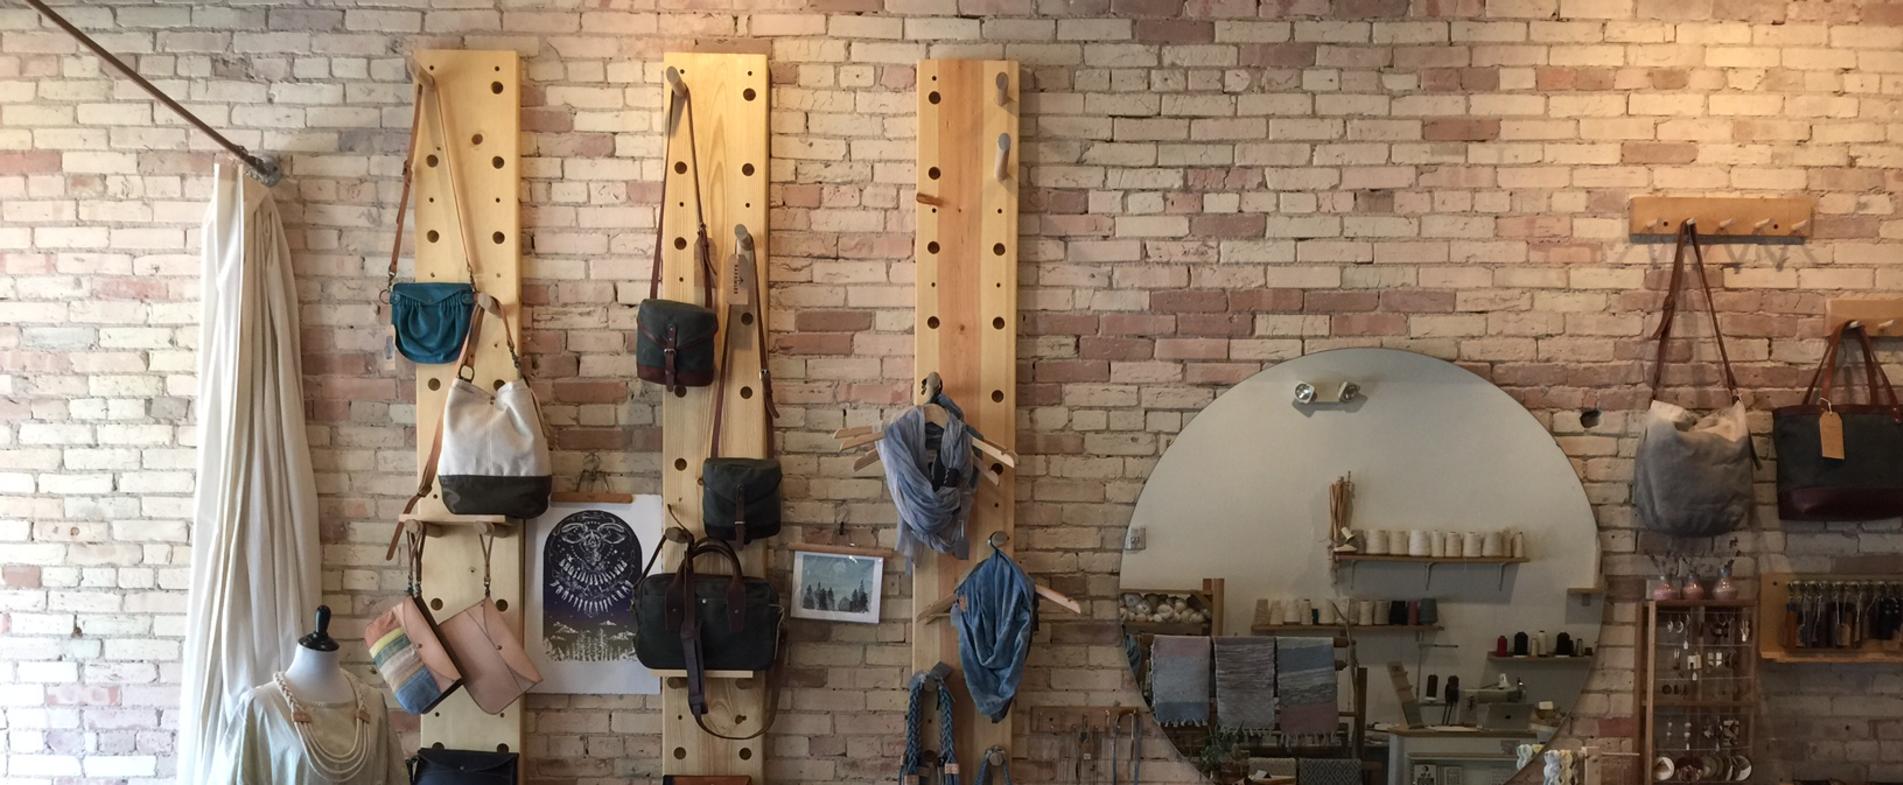 Find Handmade Gifts at These Grand Rapids' Artisan Shops